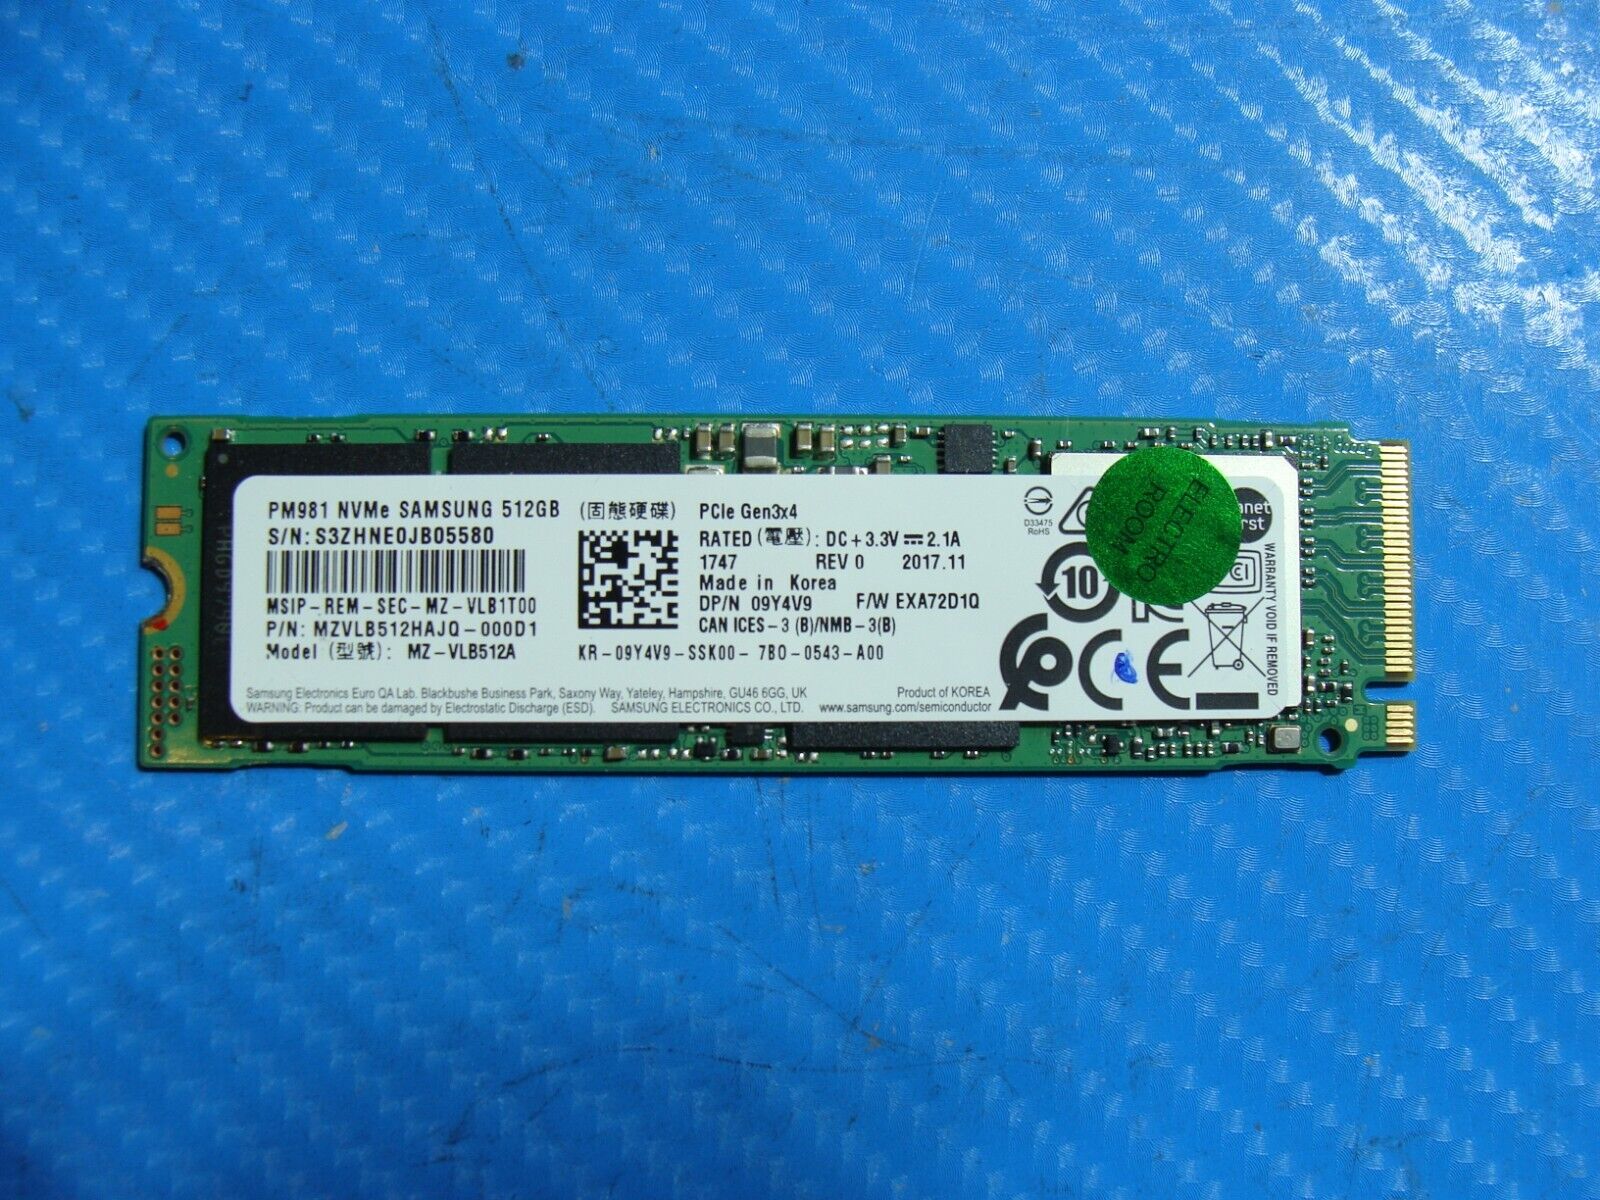 Dell 7520 Samsung 512GB NVMe M.2 SSD Solid State Drive MZVLB512HAJQ-000D1 9Y4V9